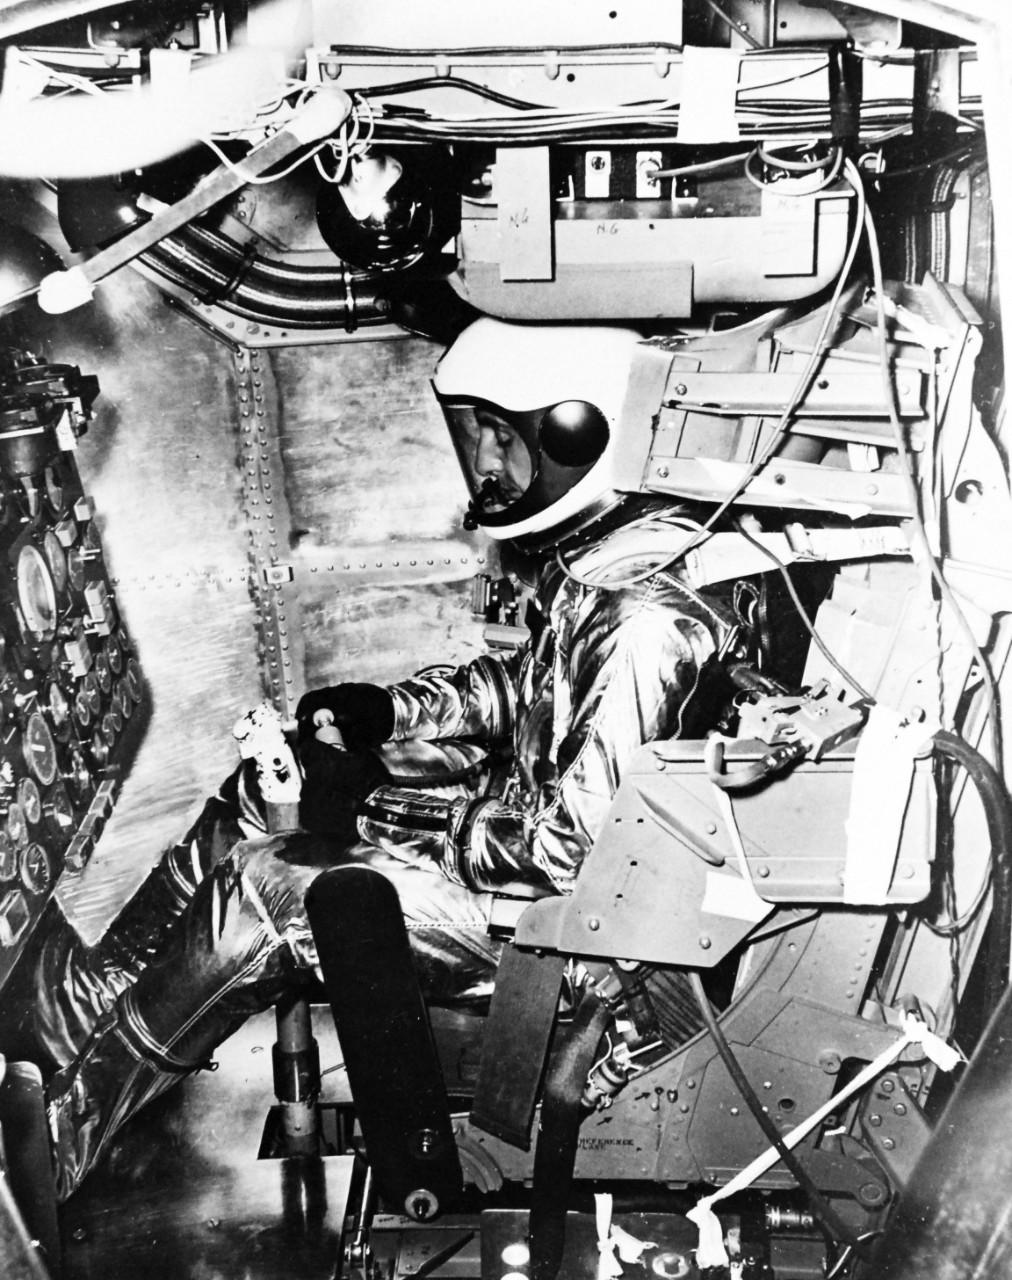 USN 1036462:  Aviation Medical Accelerator Laboratory (AMAL), late 1950s.   Space Suit.  All set for a “Flight Unto Space” test pilot Scott Crossfield, of North American Aviation readies himself at the controls of the X-15 before beginning a test run.  The flight will chart the effects of combined accelerations on pilots during high speeds, late 1950s. AMAL is noted for being used for flight simulation training for the Project Mercury astronauts.    Official U.S. Navy Photograph, now in the collections of the National Archives.  